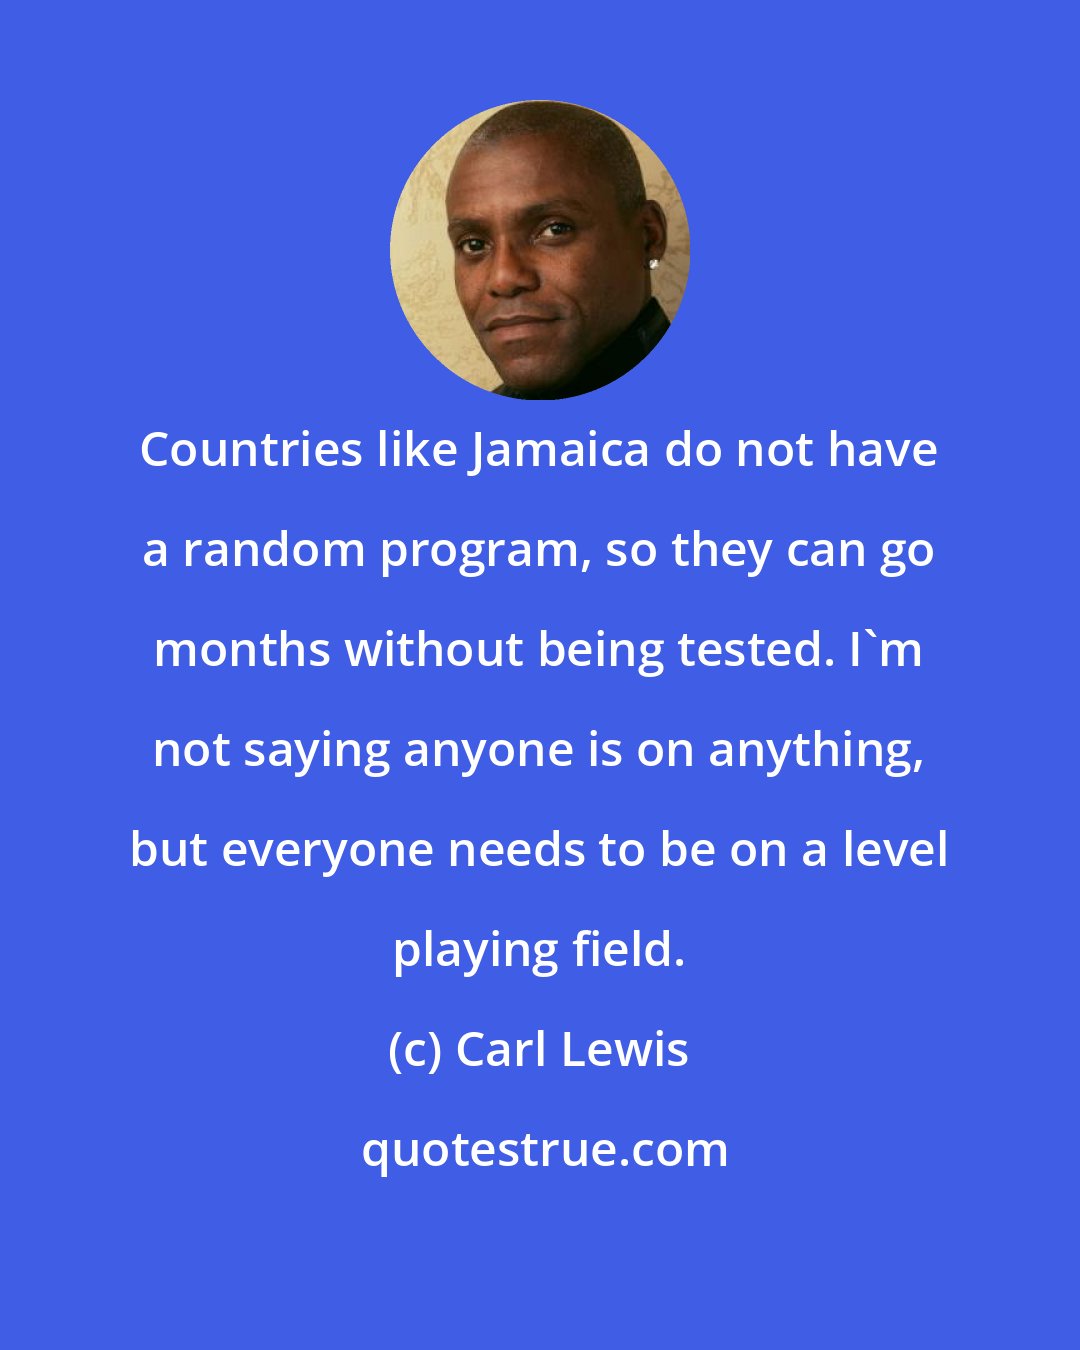 Carl Lewis: Countries like Jamaica do not have a random program, so they can go months without being tested. I'm not saying anyone is on anything, but everyone needs to be on a level playing field.